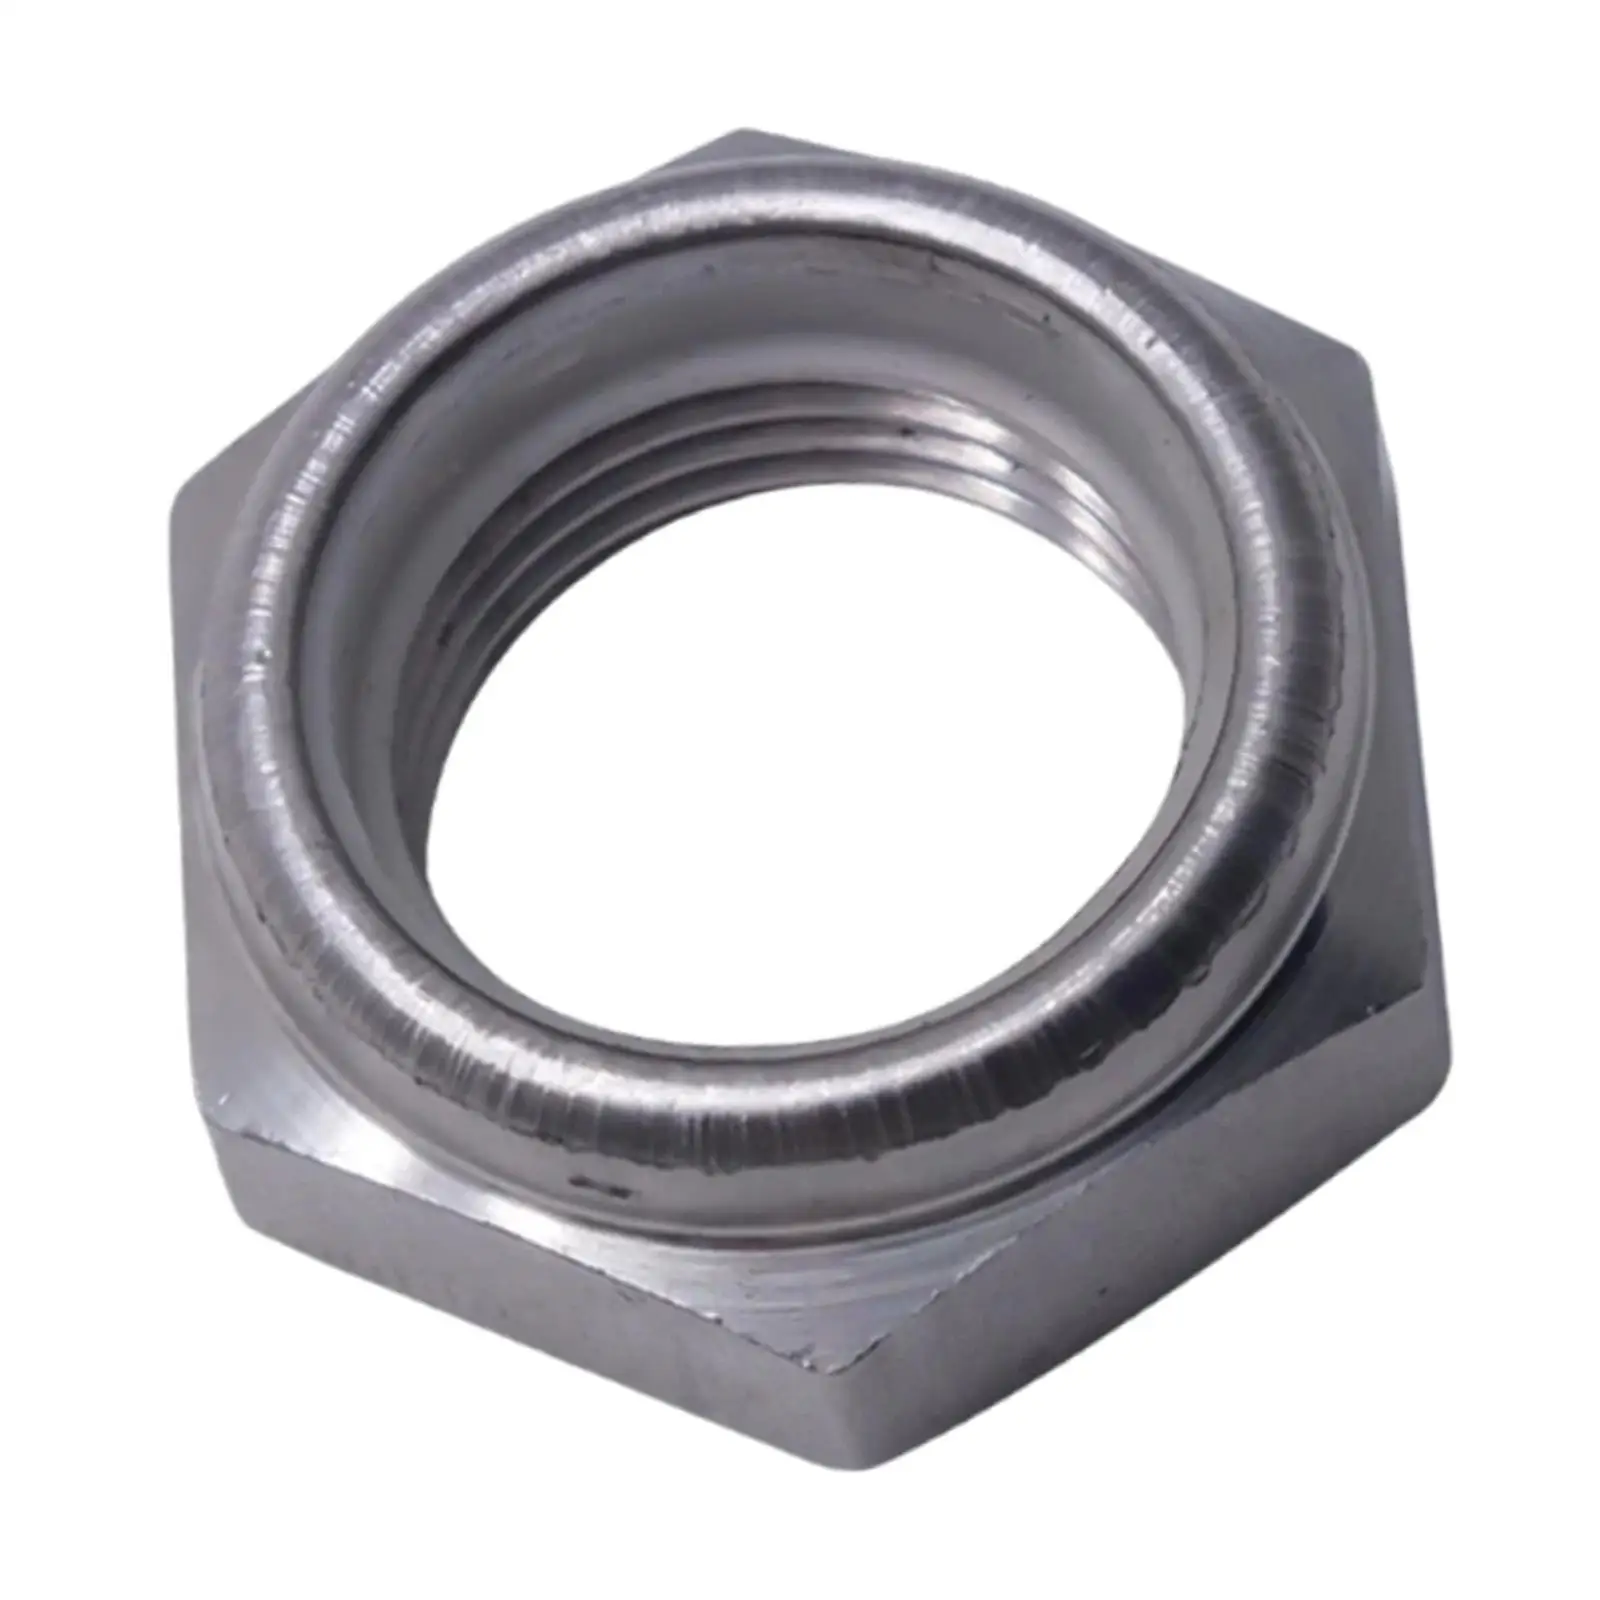 Self Locking Nut 90185-22043-00 Sturdy for Seapro Vehicle Repair Parts